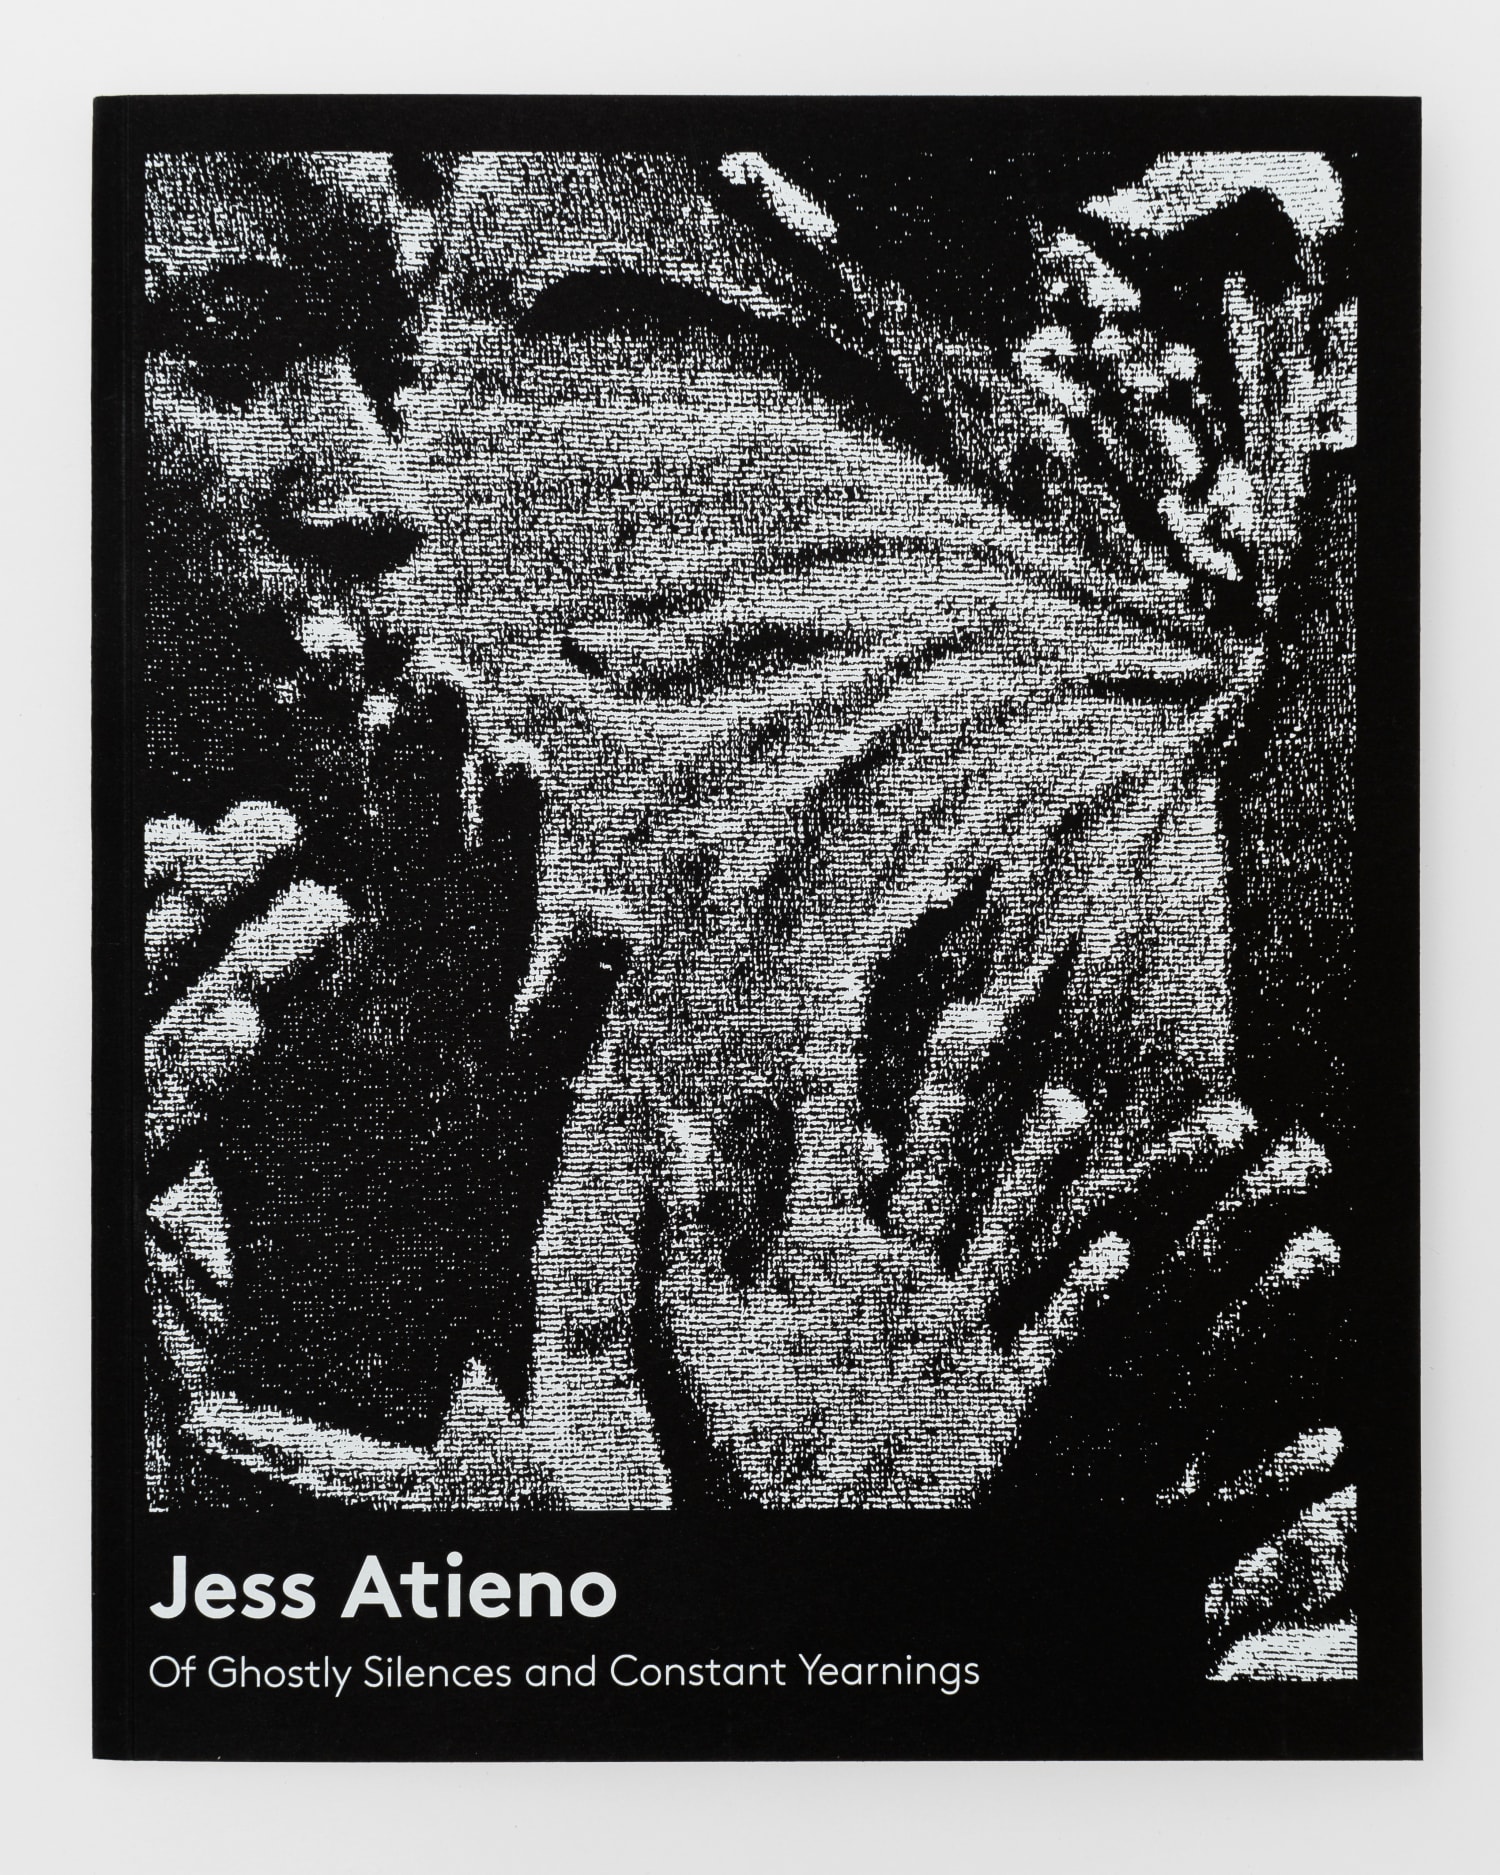 Jess Atieno - Of Ghostly Silences and Constant Yearnings